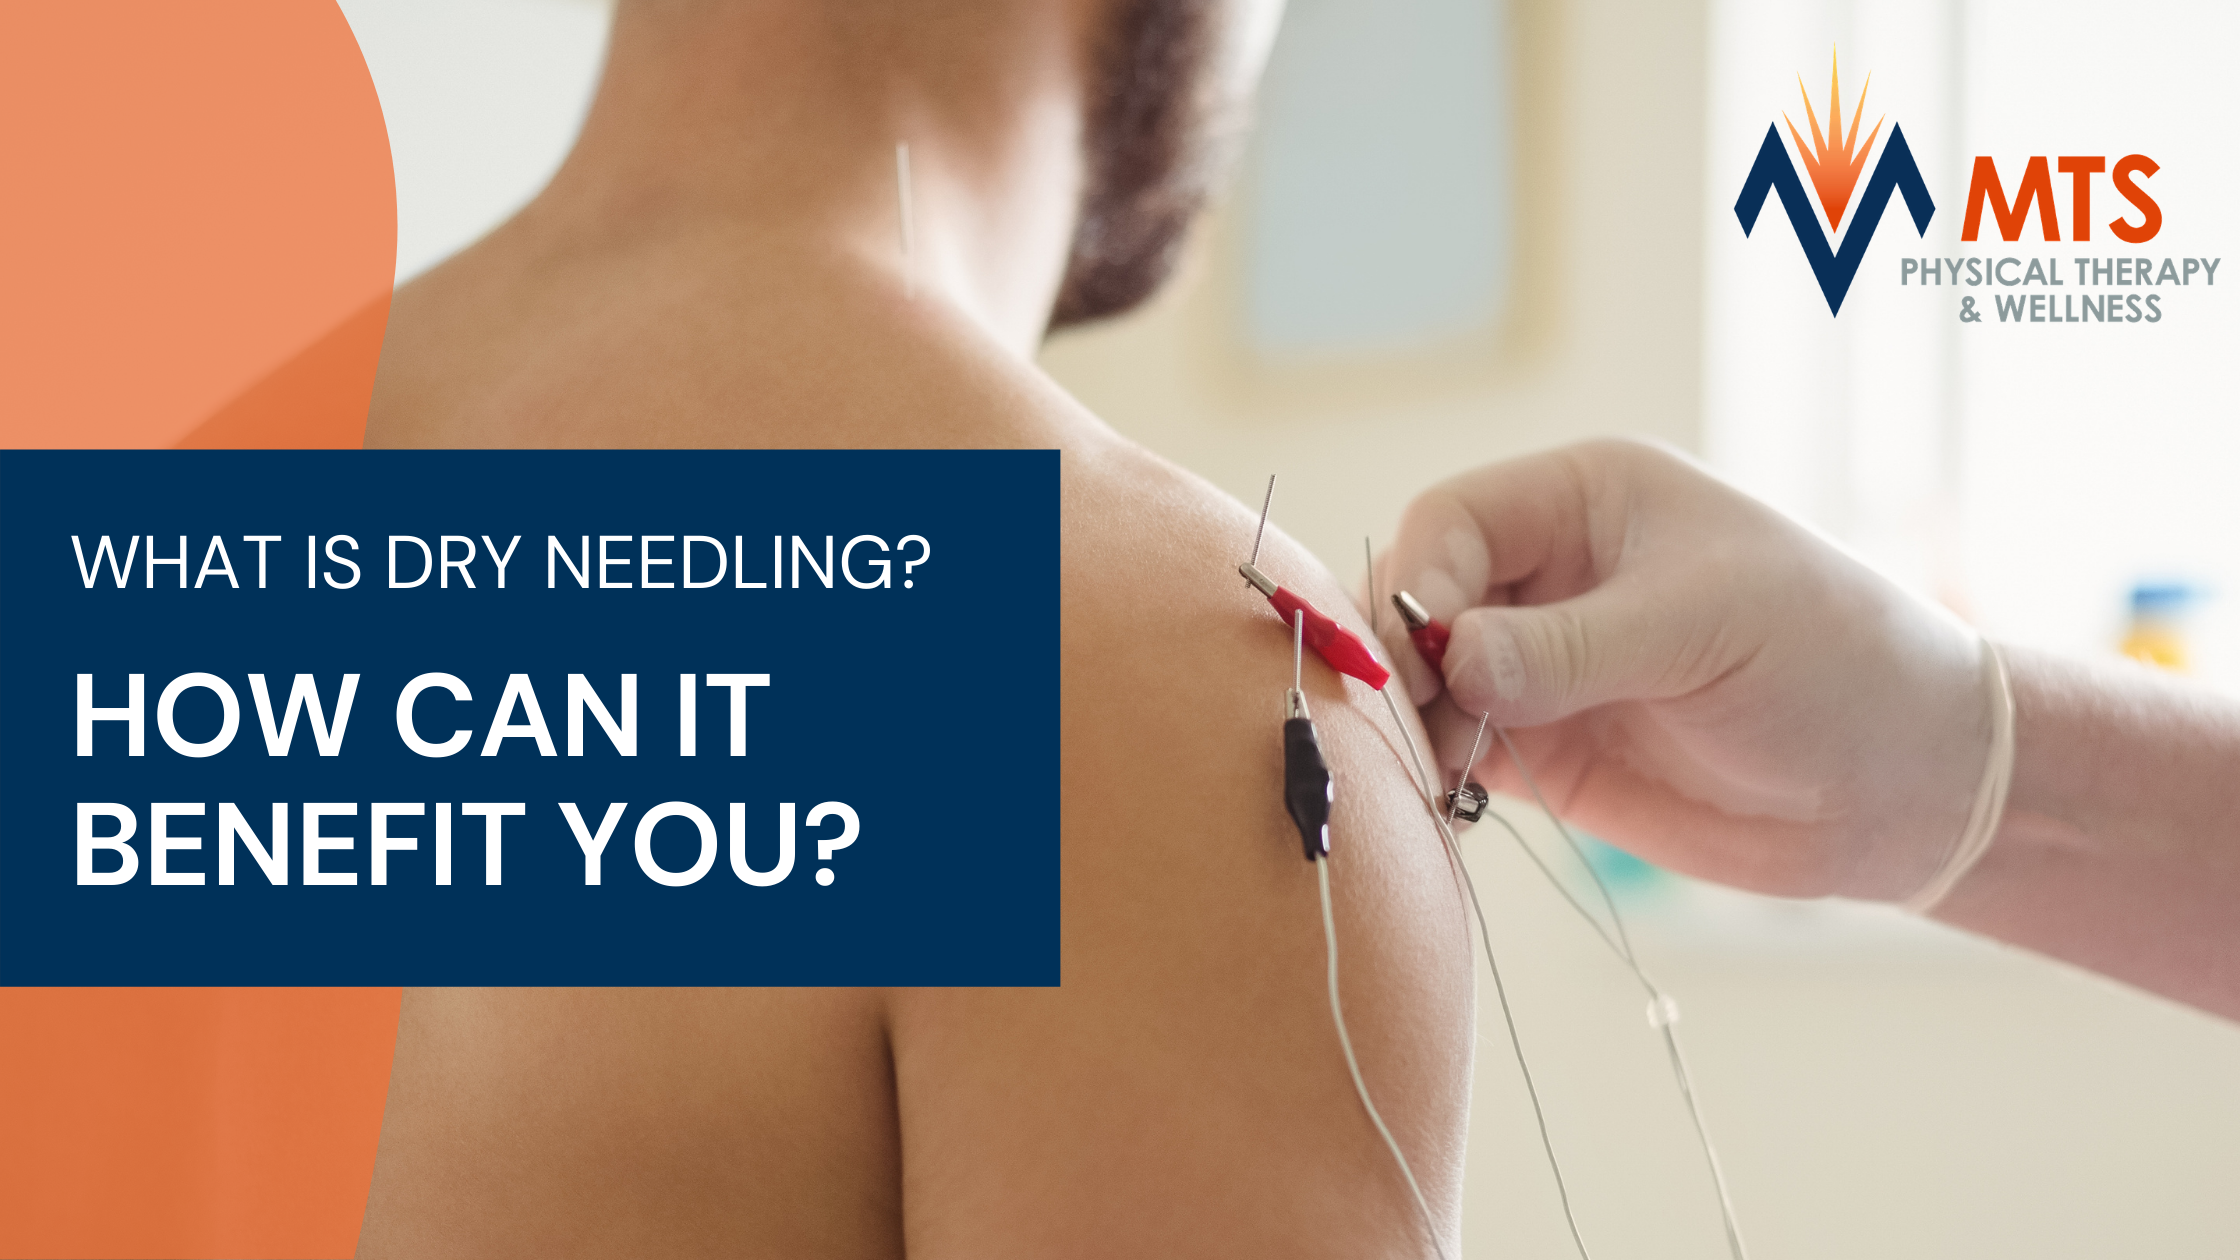 What Is Dry Needling And How Can It Benefit You